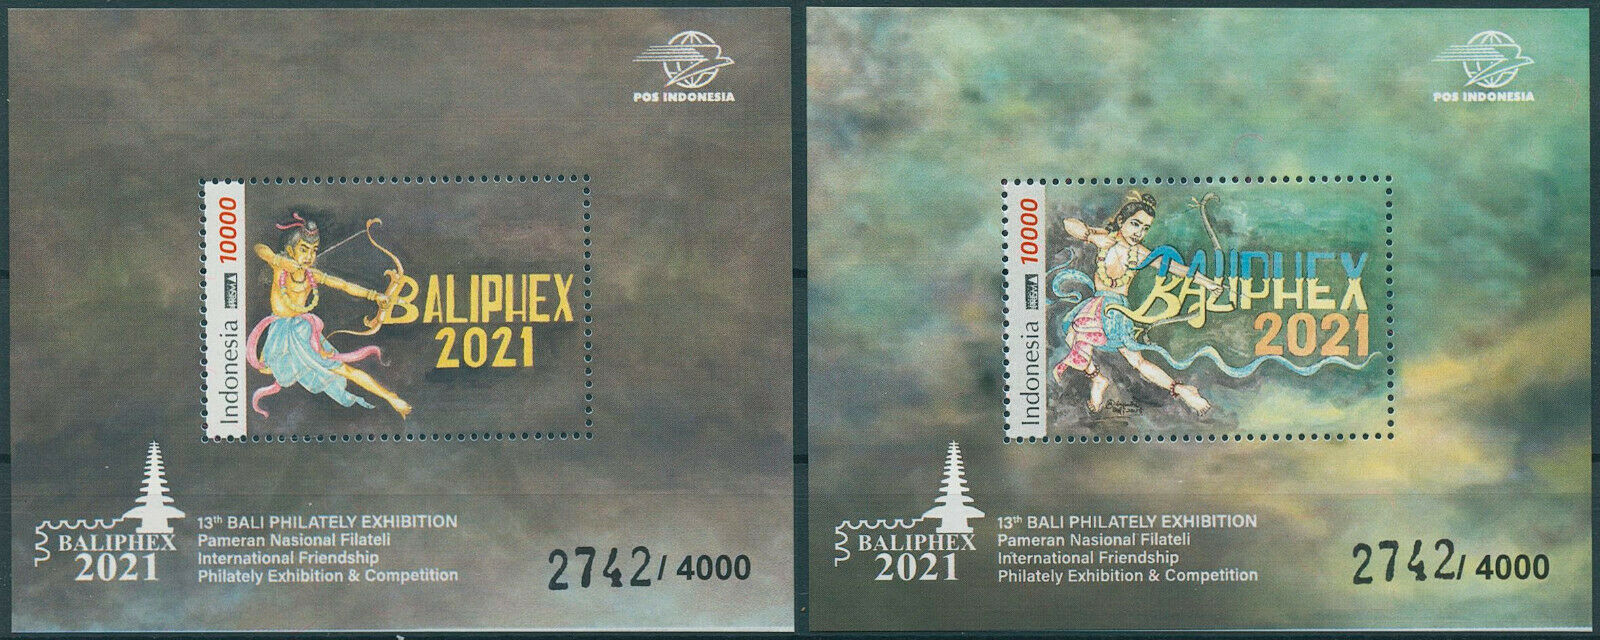 Indonesia 2021 MNH Stamps Baliphex 13th Bali Phillately Exhbition 2x 1v M/S